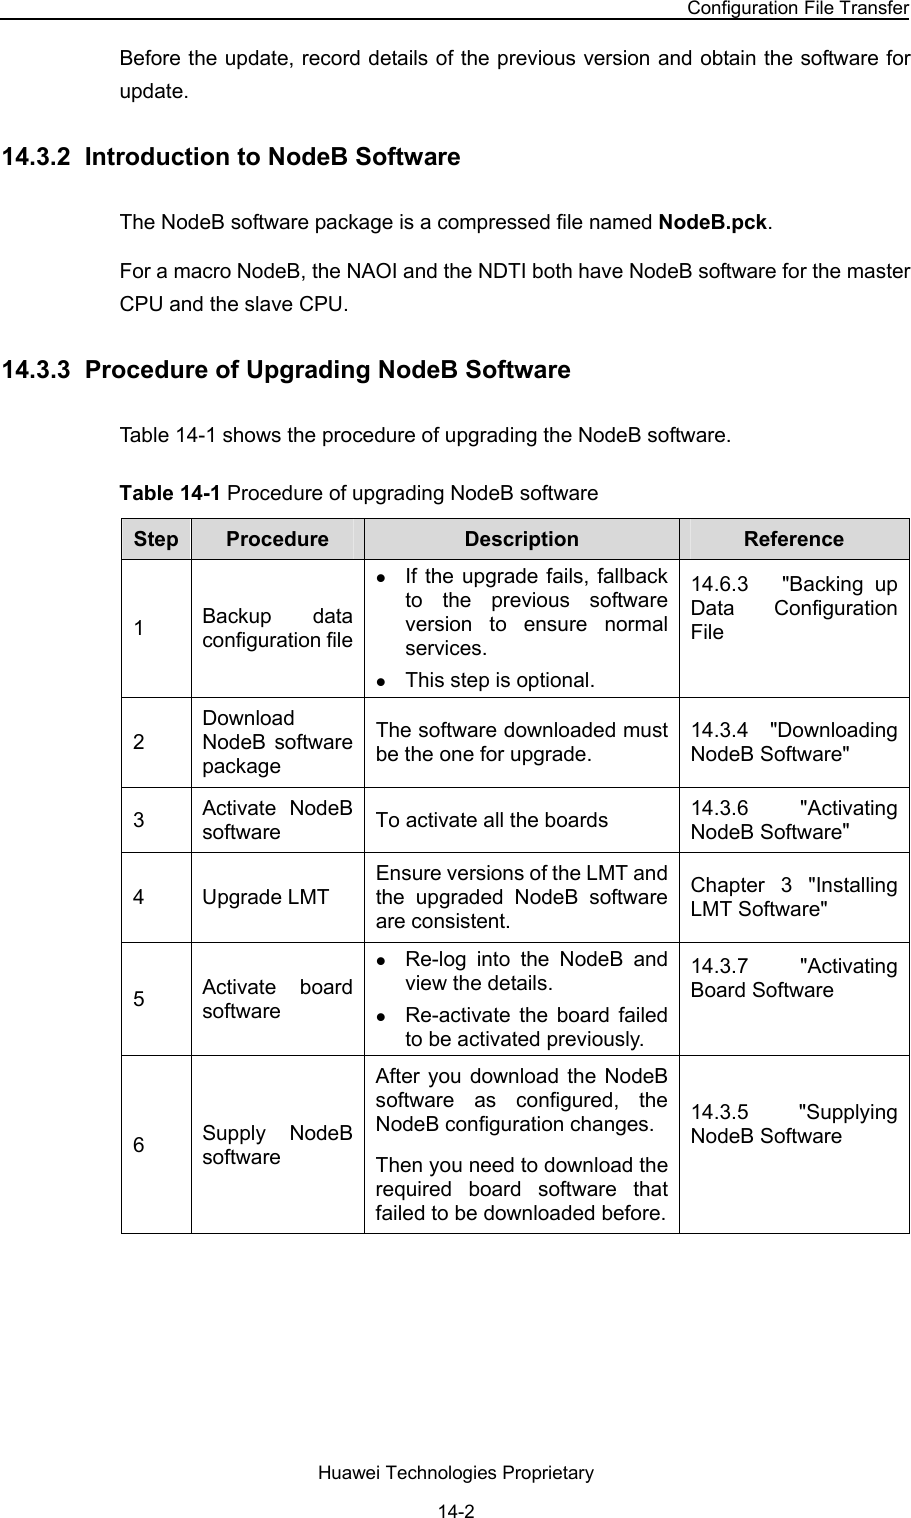 NodeB LMT User Guide Chapter 14  NodeB Software Update and Data Configuration File Transfer Huawei Technologies Proprietary 14-2 Before the update, record details of the previous version and obtain the software for update. 14.3.2  Introduction to NodeB Software The NodeB software package is a compressed file named NodeB.pck.  For a macro NodeB, the NAOI and the NDTI both have NodeB software for the master CPU and the slave CPU. 14.3.3  Procedure of Upgrading NodeB Software Table 14-1 shows the procedure of upgrading the NodeB software.  Table 14-1 Procedure of upgrading NodeB software Step   Procedure  Description  Reference  1  Backup data configuration filez If the upgrade fails, fallback to the previous software version to ensure normal services.  z This step is optional. 14.6.3   &quot;Backing up Data Configuration File   2 Download NodeB software package The software downloaded must be the one for upgrade. 14.3.4   &quot;Downloading NodeB Software&quot;  3  Activate NodeB software To activate all the boards 14.3.6   &quot;Activating NodeB Software&quot; 4 Upgrade LMT Ensure versions of the LMT and the upgraded NodeB software are consistent.  Chapter 3 &quot;Installing LMT Software&quot; 5  Activate board software z Re-log into the NodeB and view the details.  z Re-activate the board failed to be activated previously.  14.3.7   &quot;Activating Board Software  6  Supply NodeB software After you download the NodeB software as configured, the NodeB configuration changes. Then you need to download the required board software that failed to be downloaded before.14.3.5   &quot;Supplying NodeB Software  